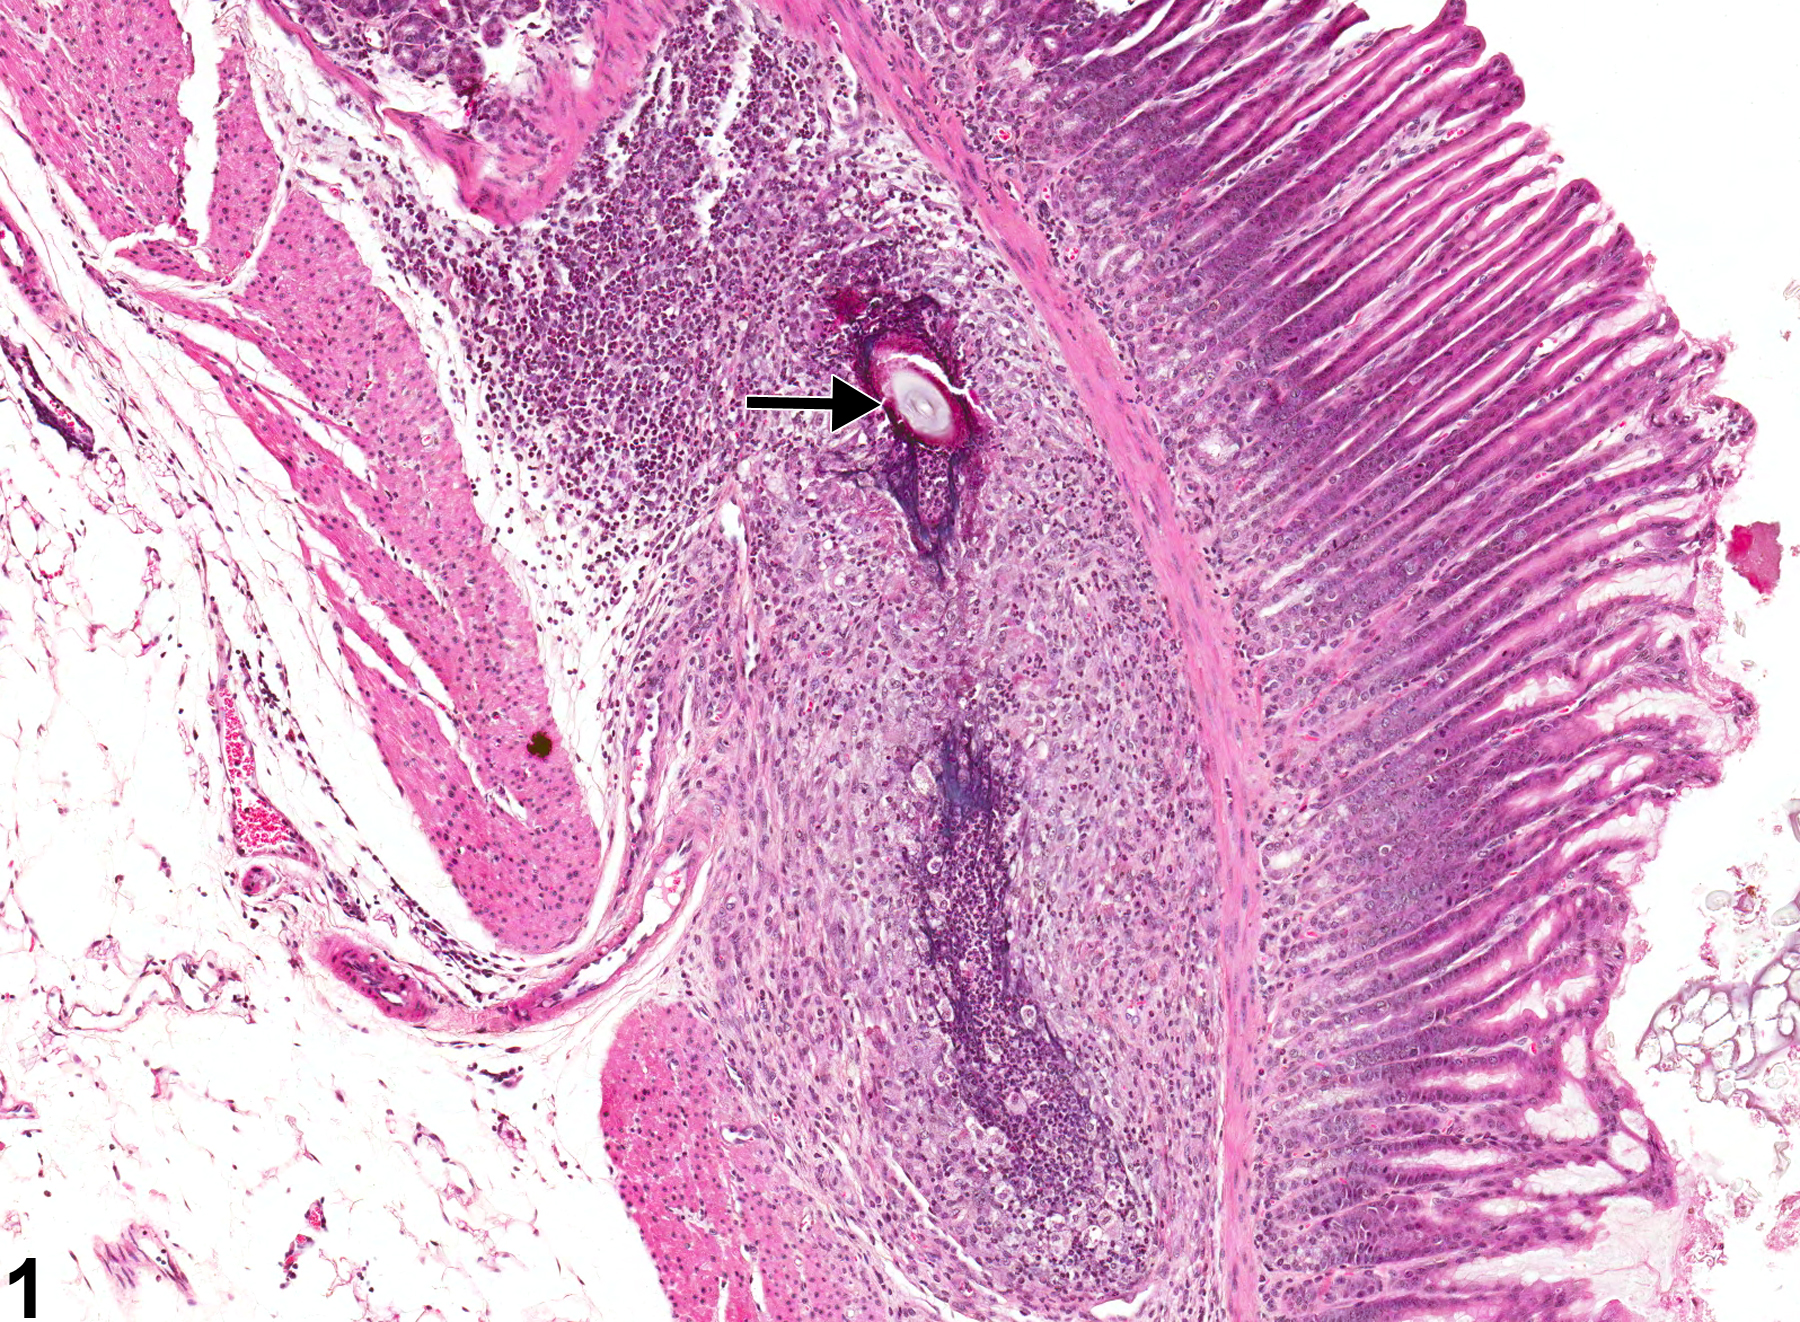 Image of foreign body in the glandular stomach from a male B6C3F1 mouse in a chronic study